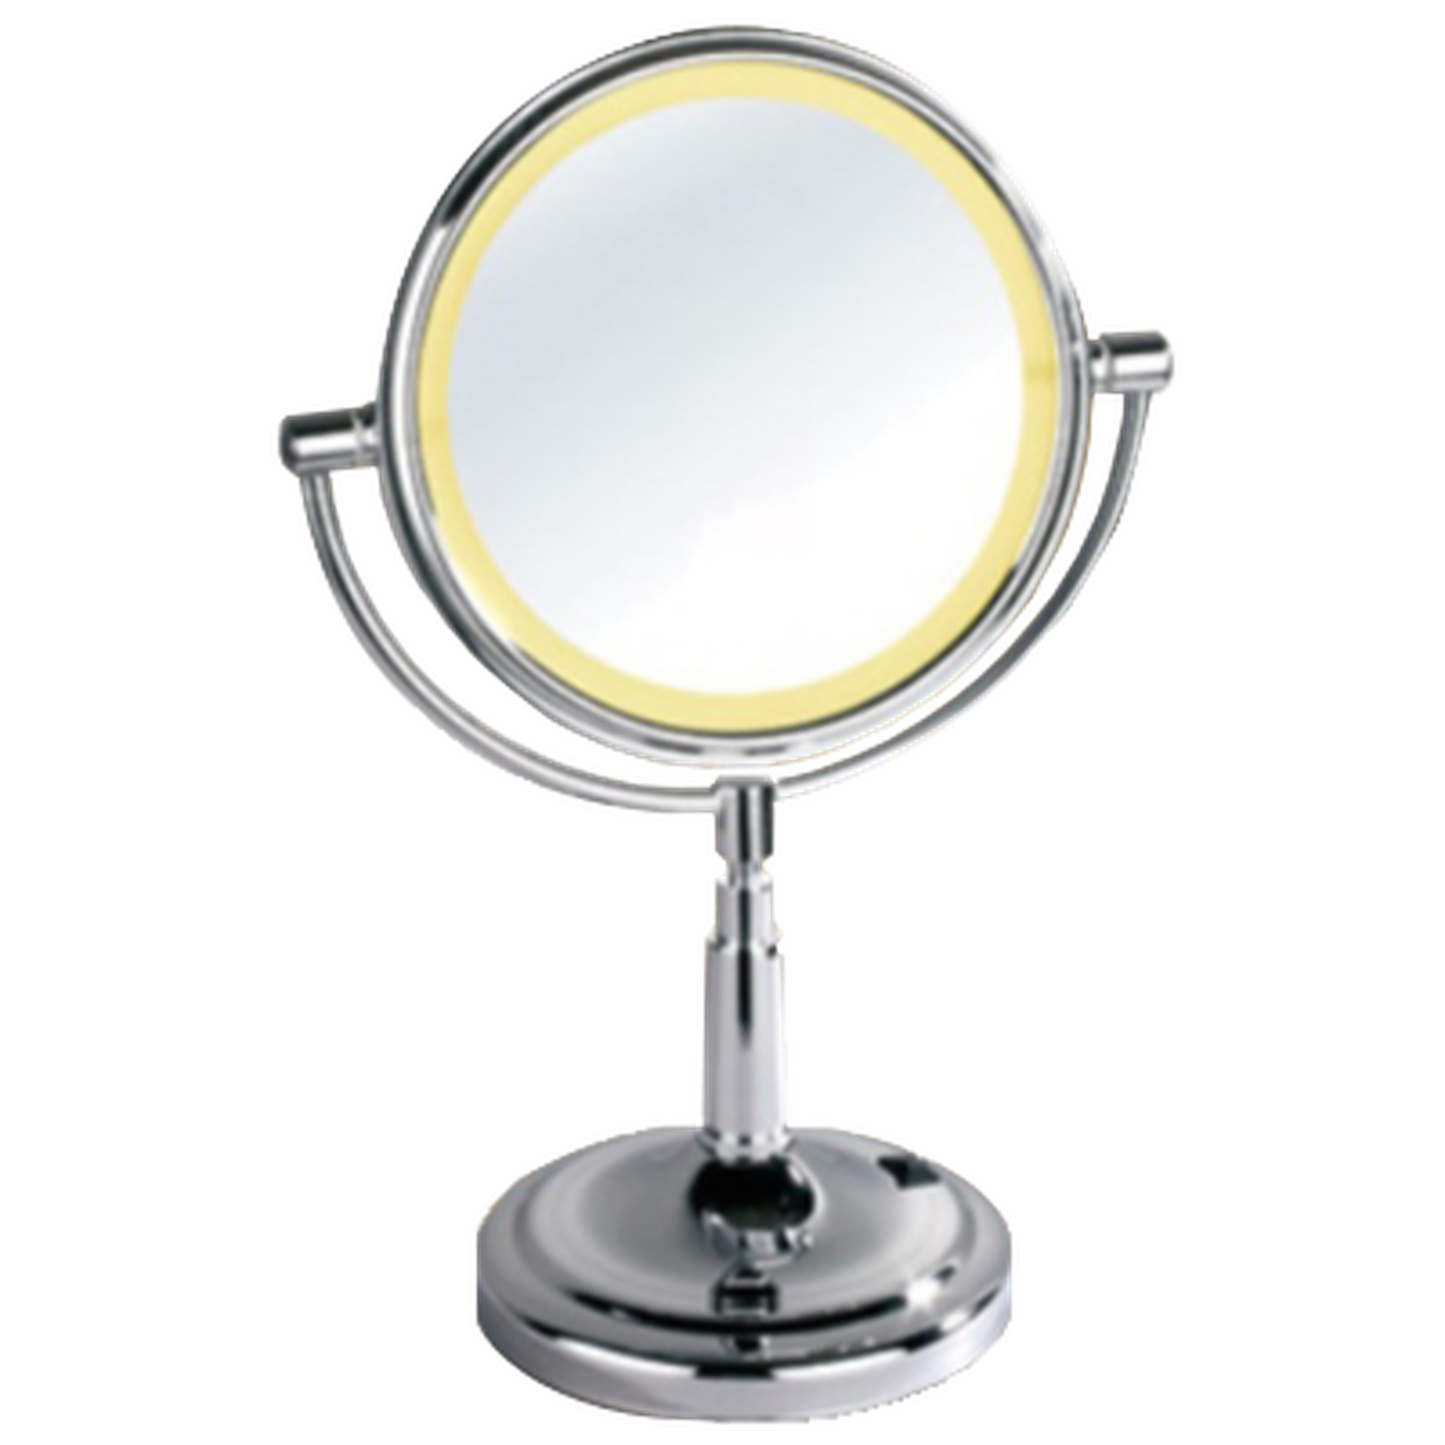 Afina 8" Polished Chrome 5X Magnification Round Battery Operated Double Sided Lighted Table Makeup Mirror